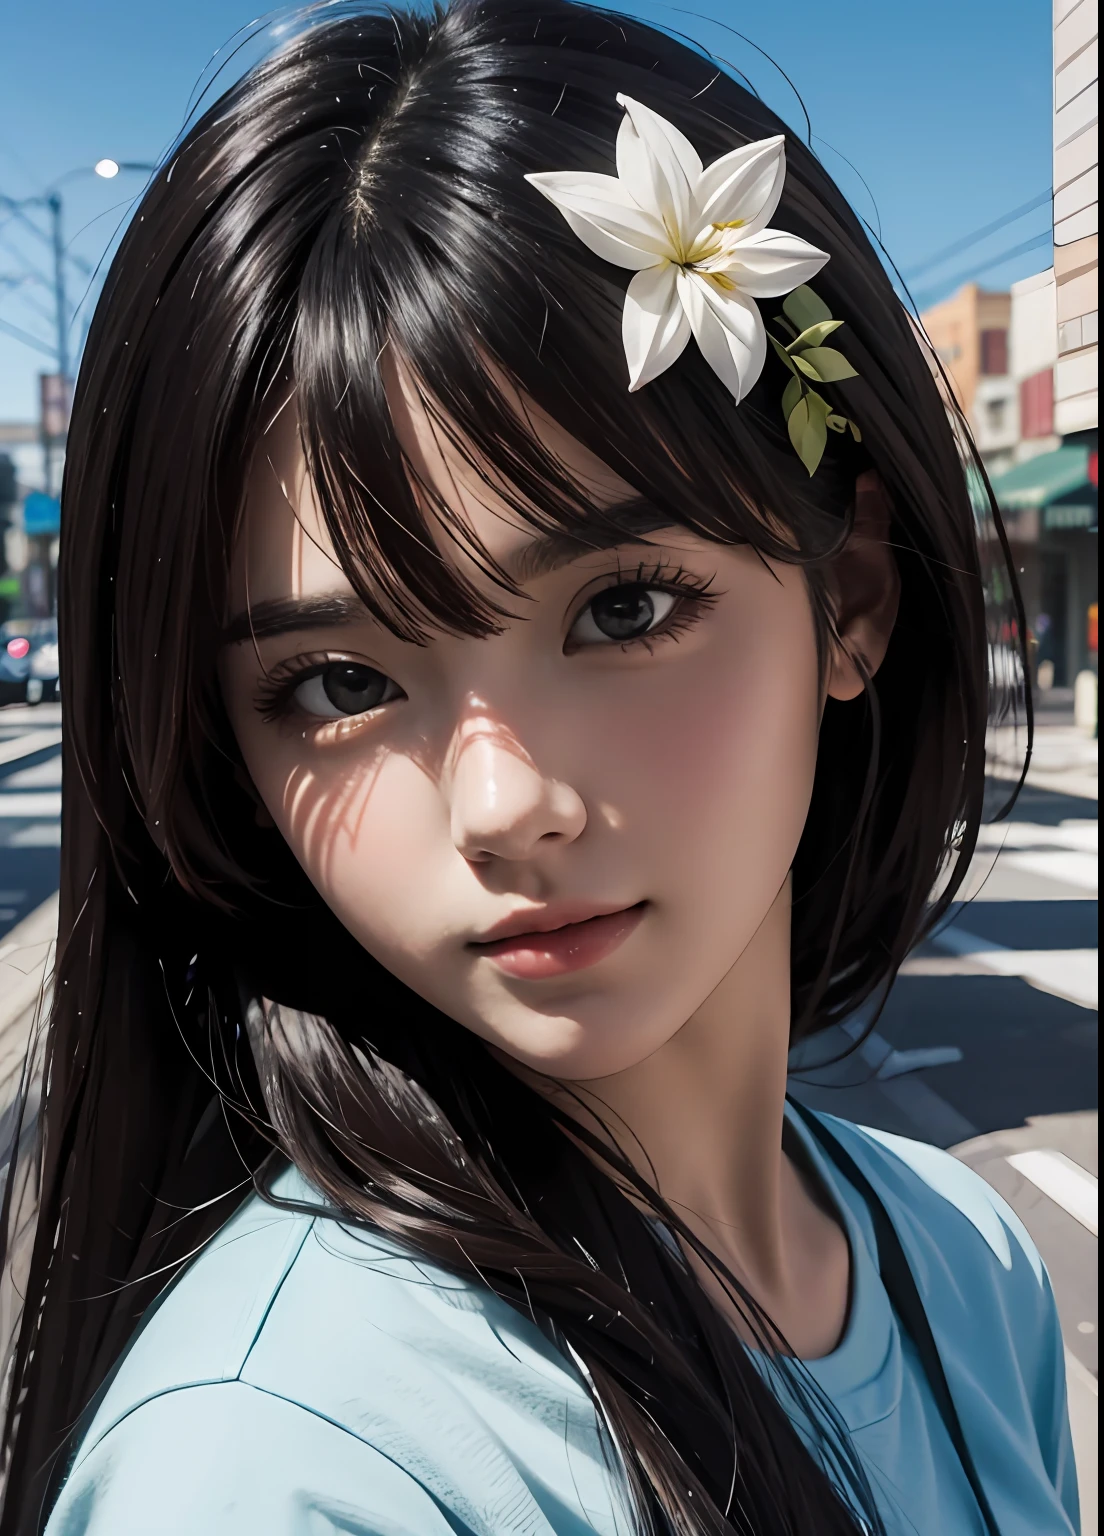 (best-quality:0.8),
(best-quality:0.8), perfect anime illustration, extreme closeup portrait of a pretty woman walking through the city